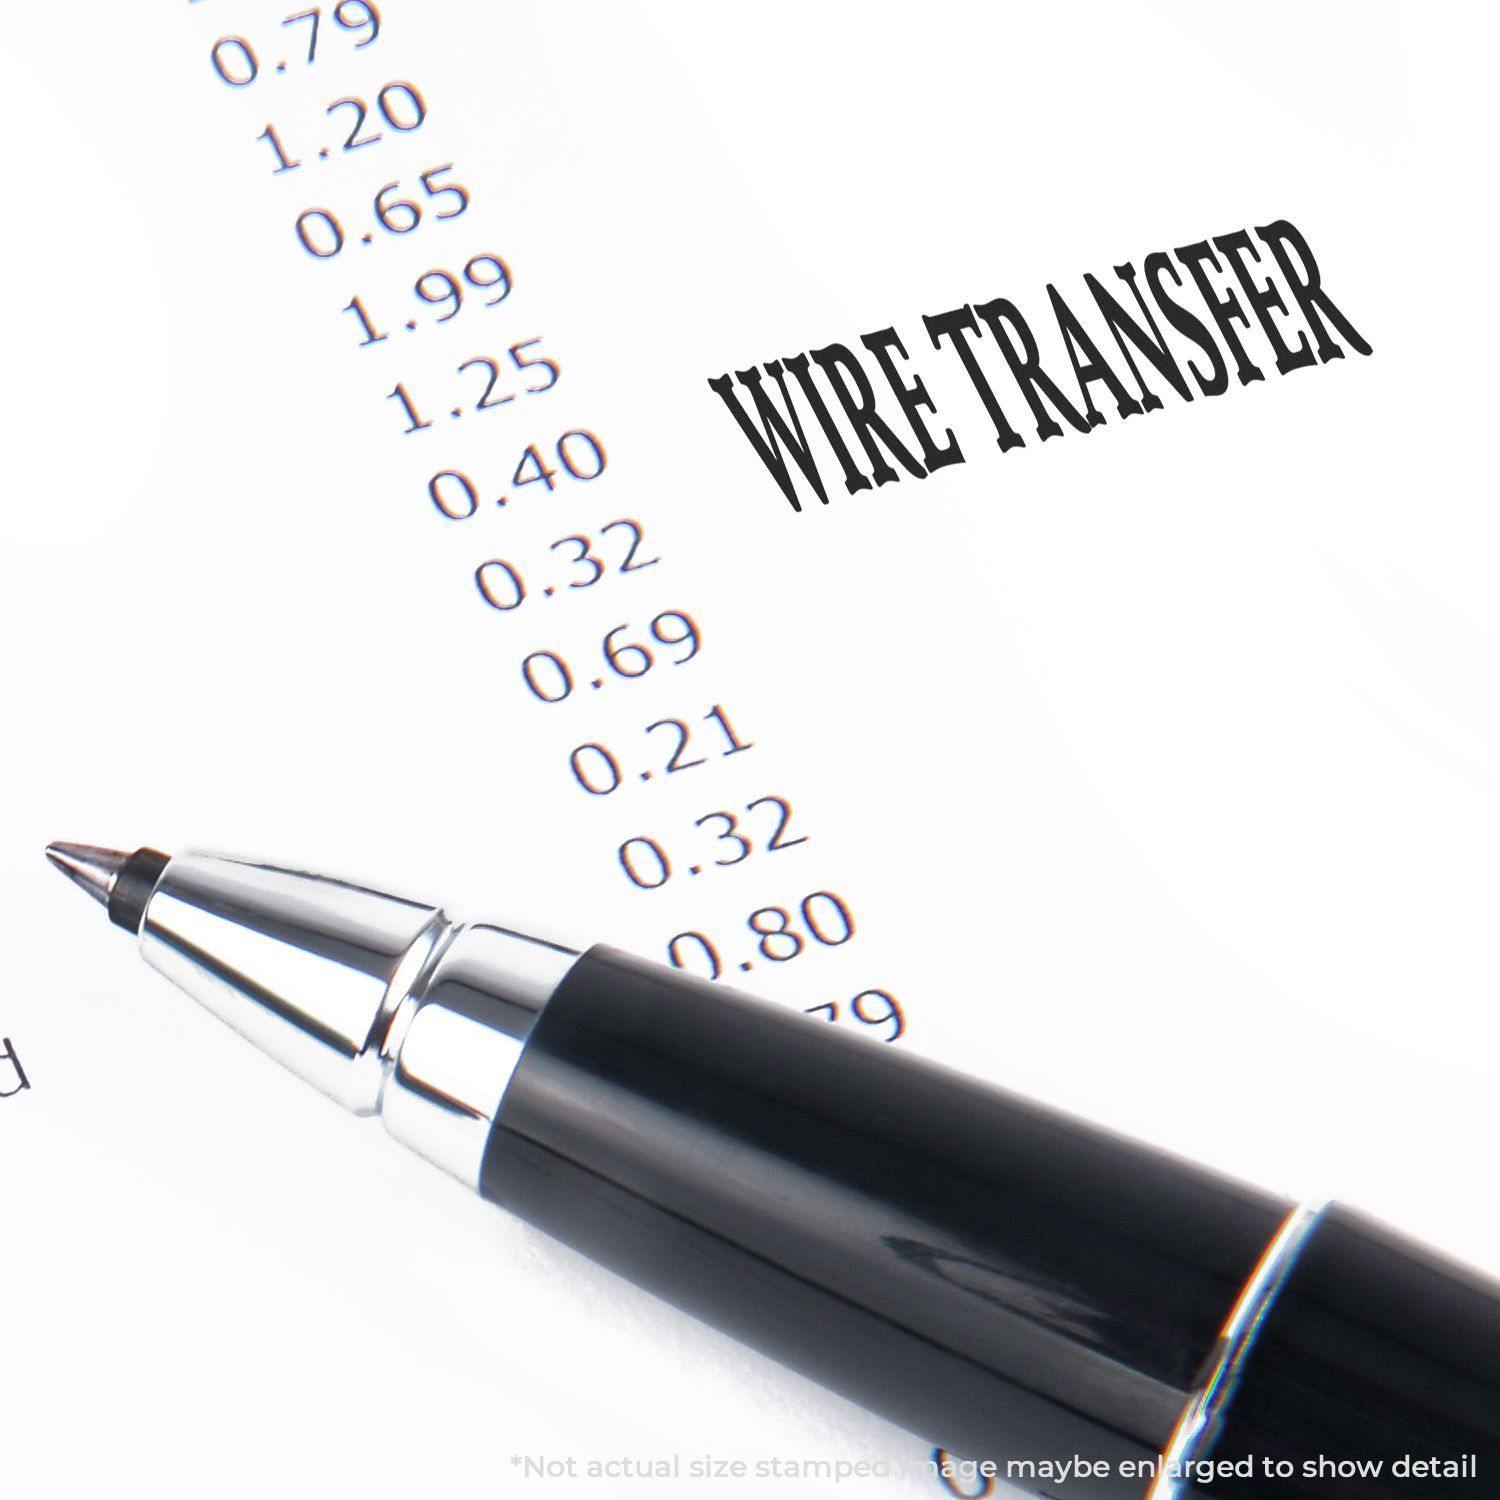 A self-inking stamp with a stamped image showing how the text "WIRE TRANSFER" in a large bold font is displayed by it.